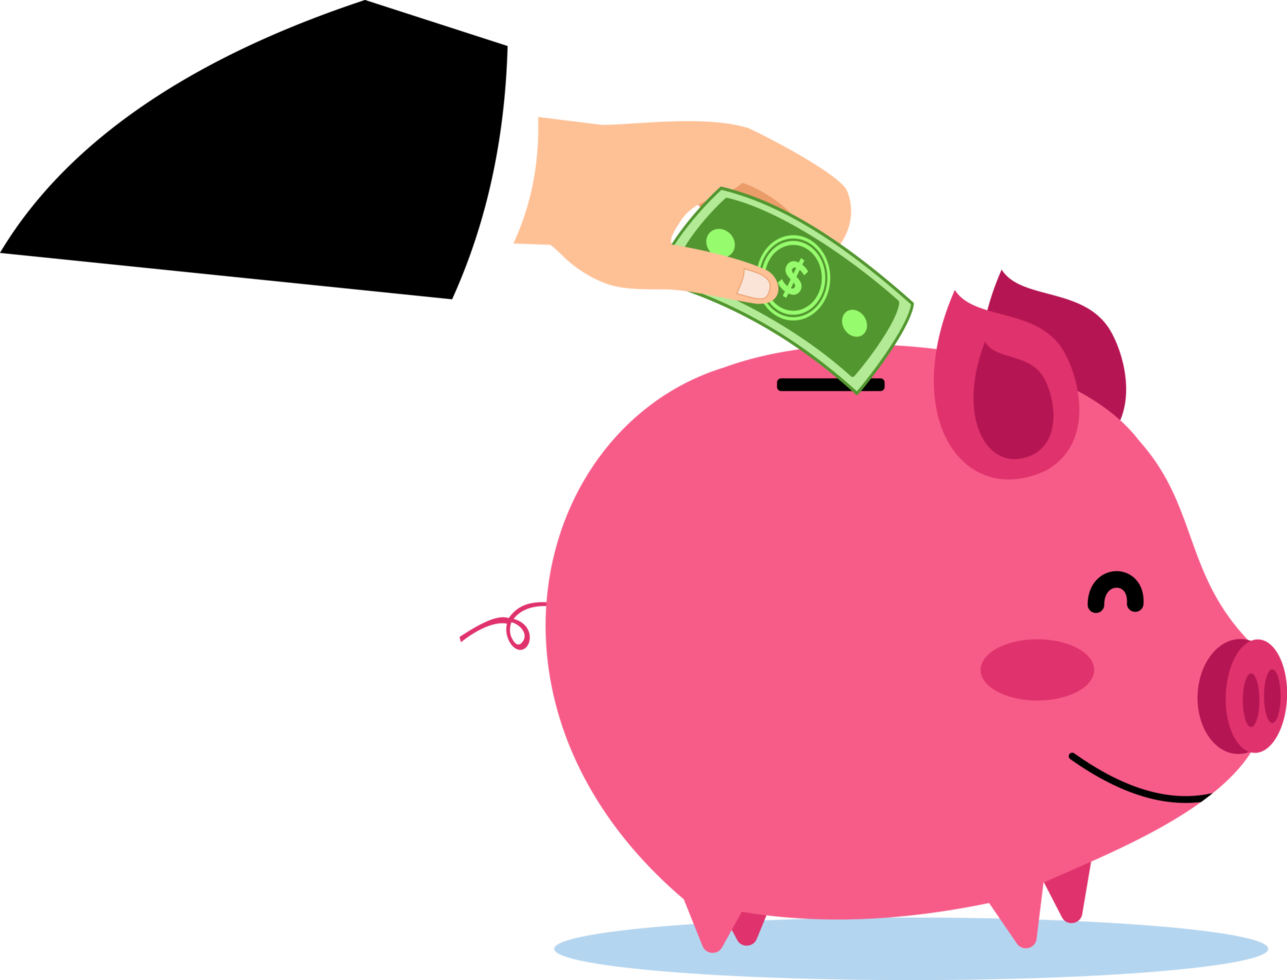 cartoon illustration of a businessman hand putting a dollar bill in a piggy bank. illustration of investing by saving in a piggy bank png